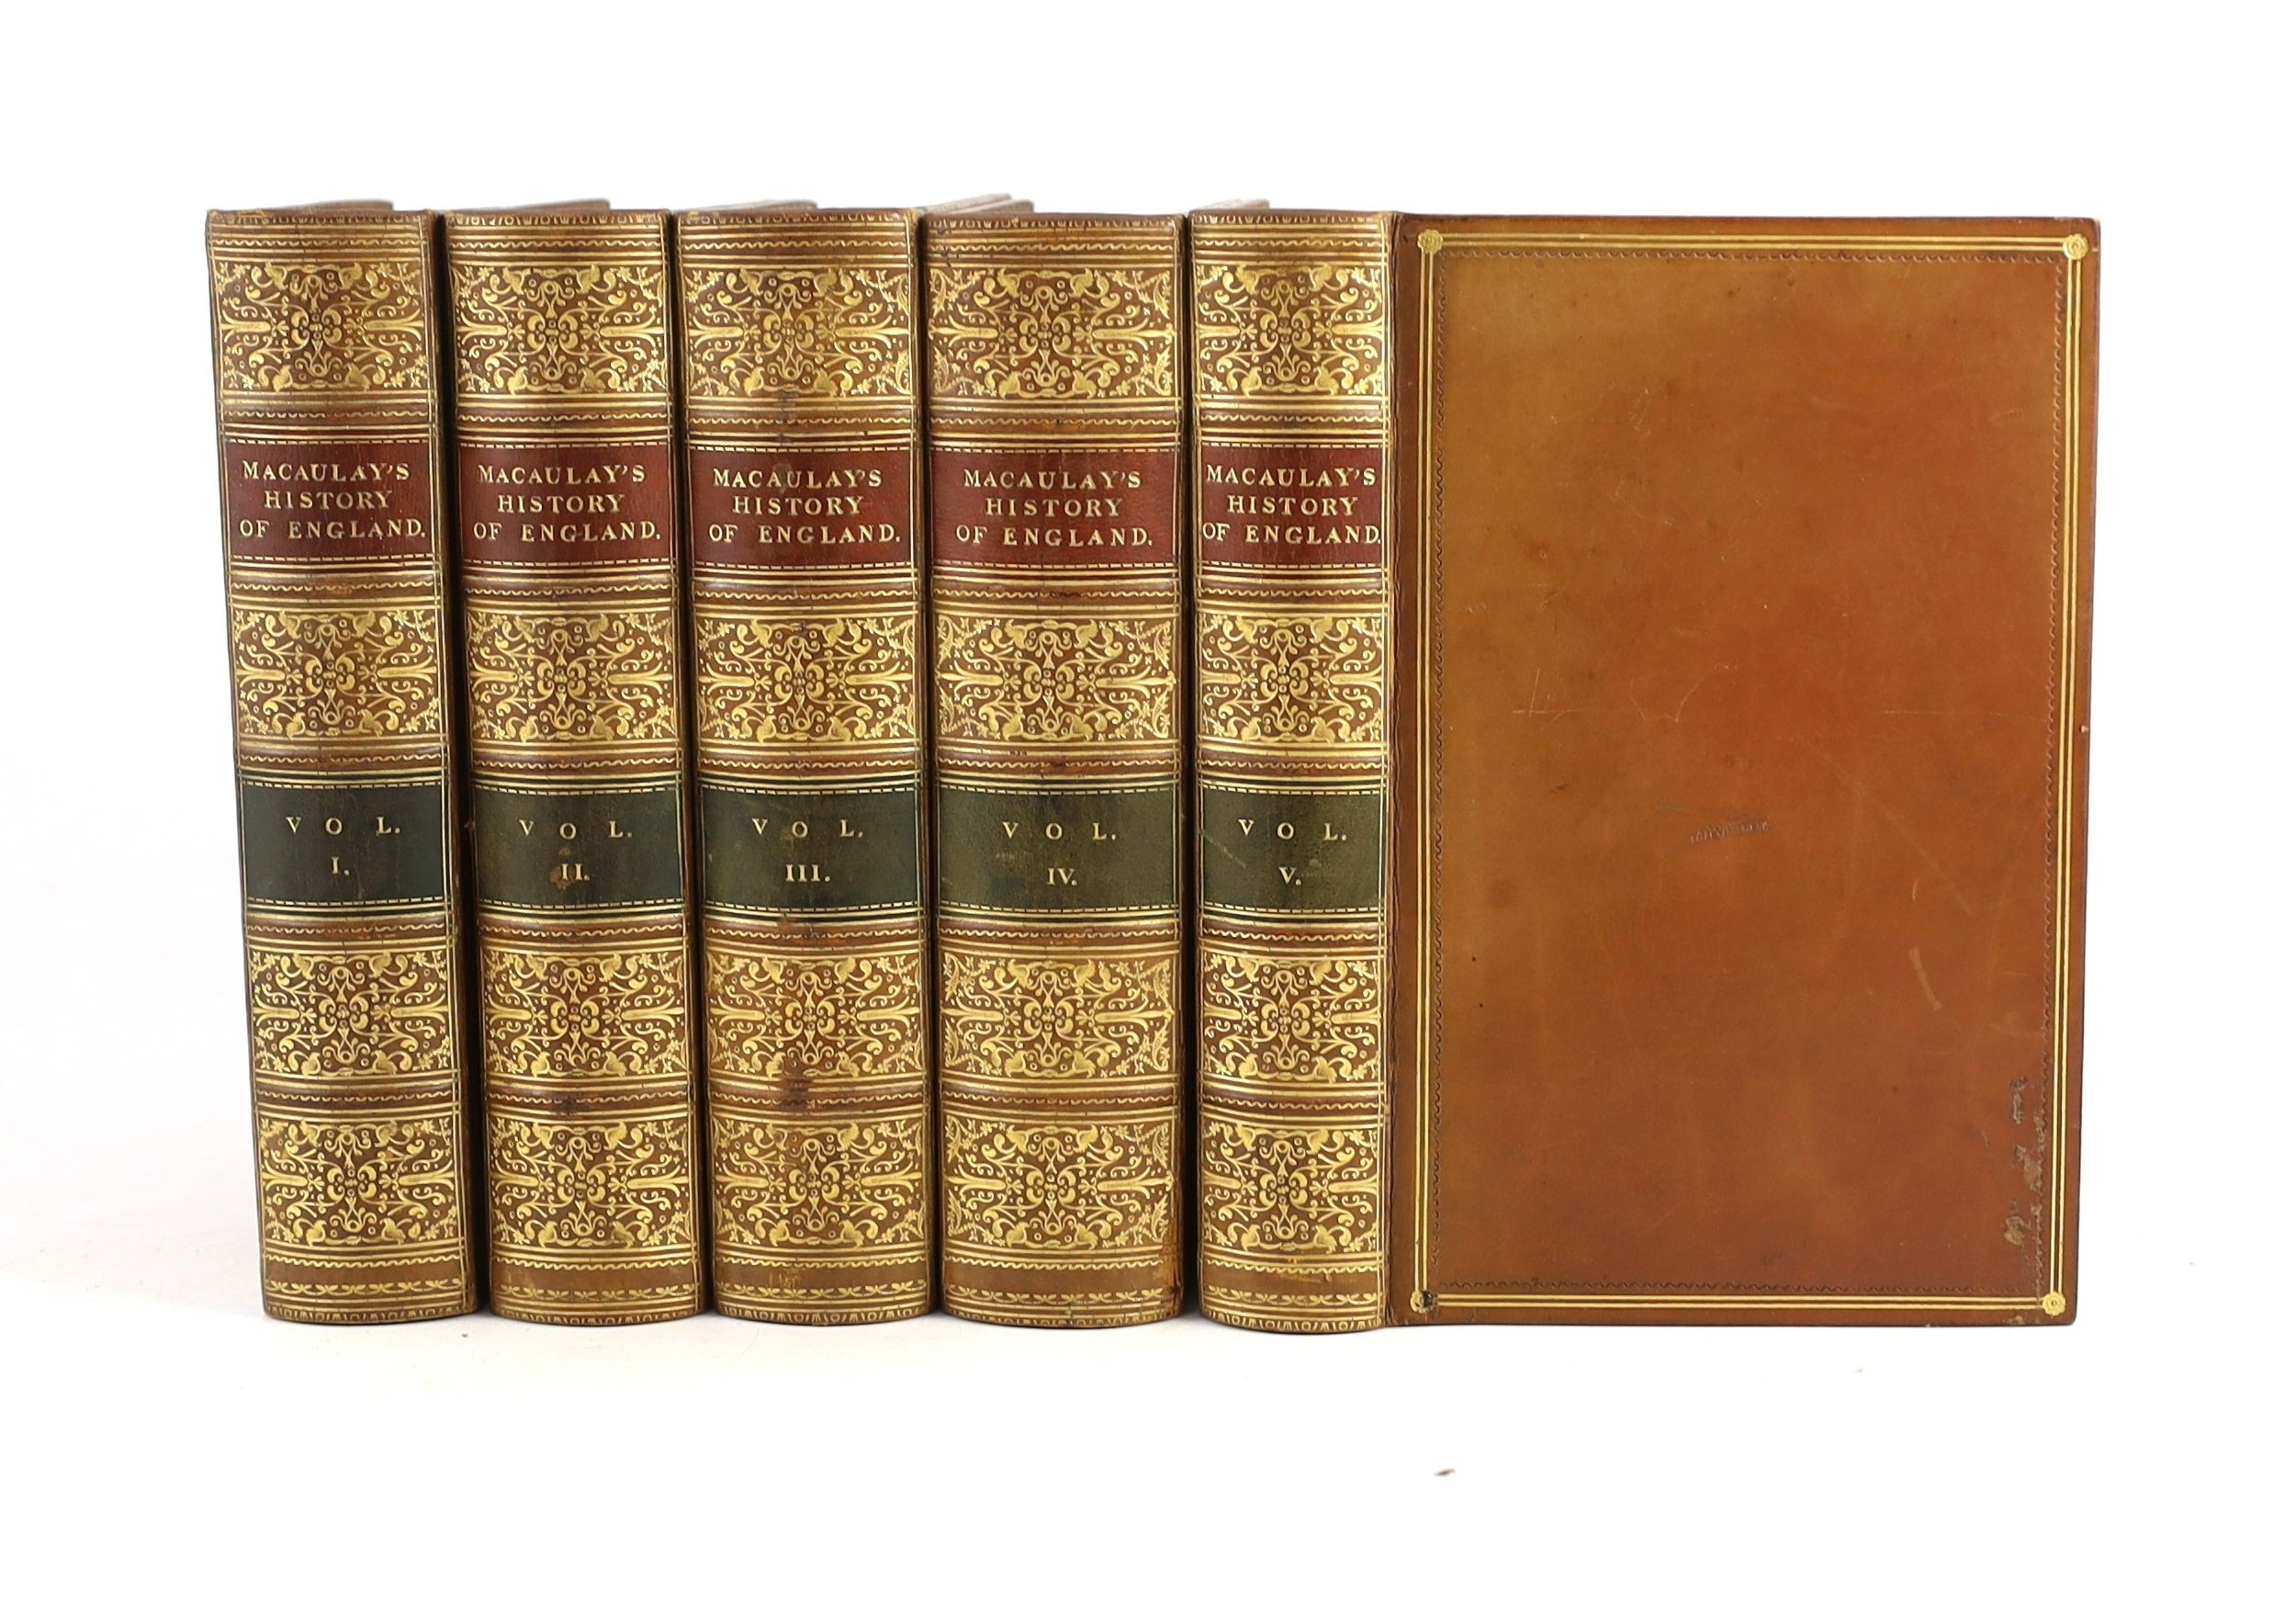 Macaulay, Lord - The History of England from the Accession of James the Second, 5 vols. contemp. gilt-ruled calf, gilt decorated panelled spines with red and green labels. 1861